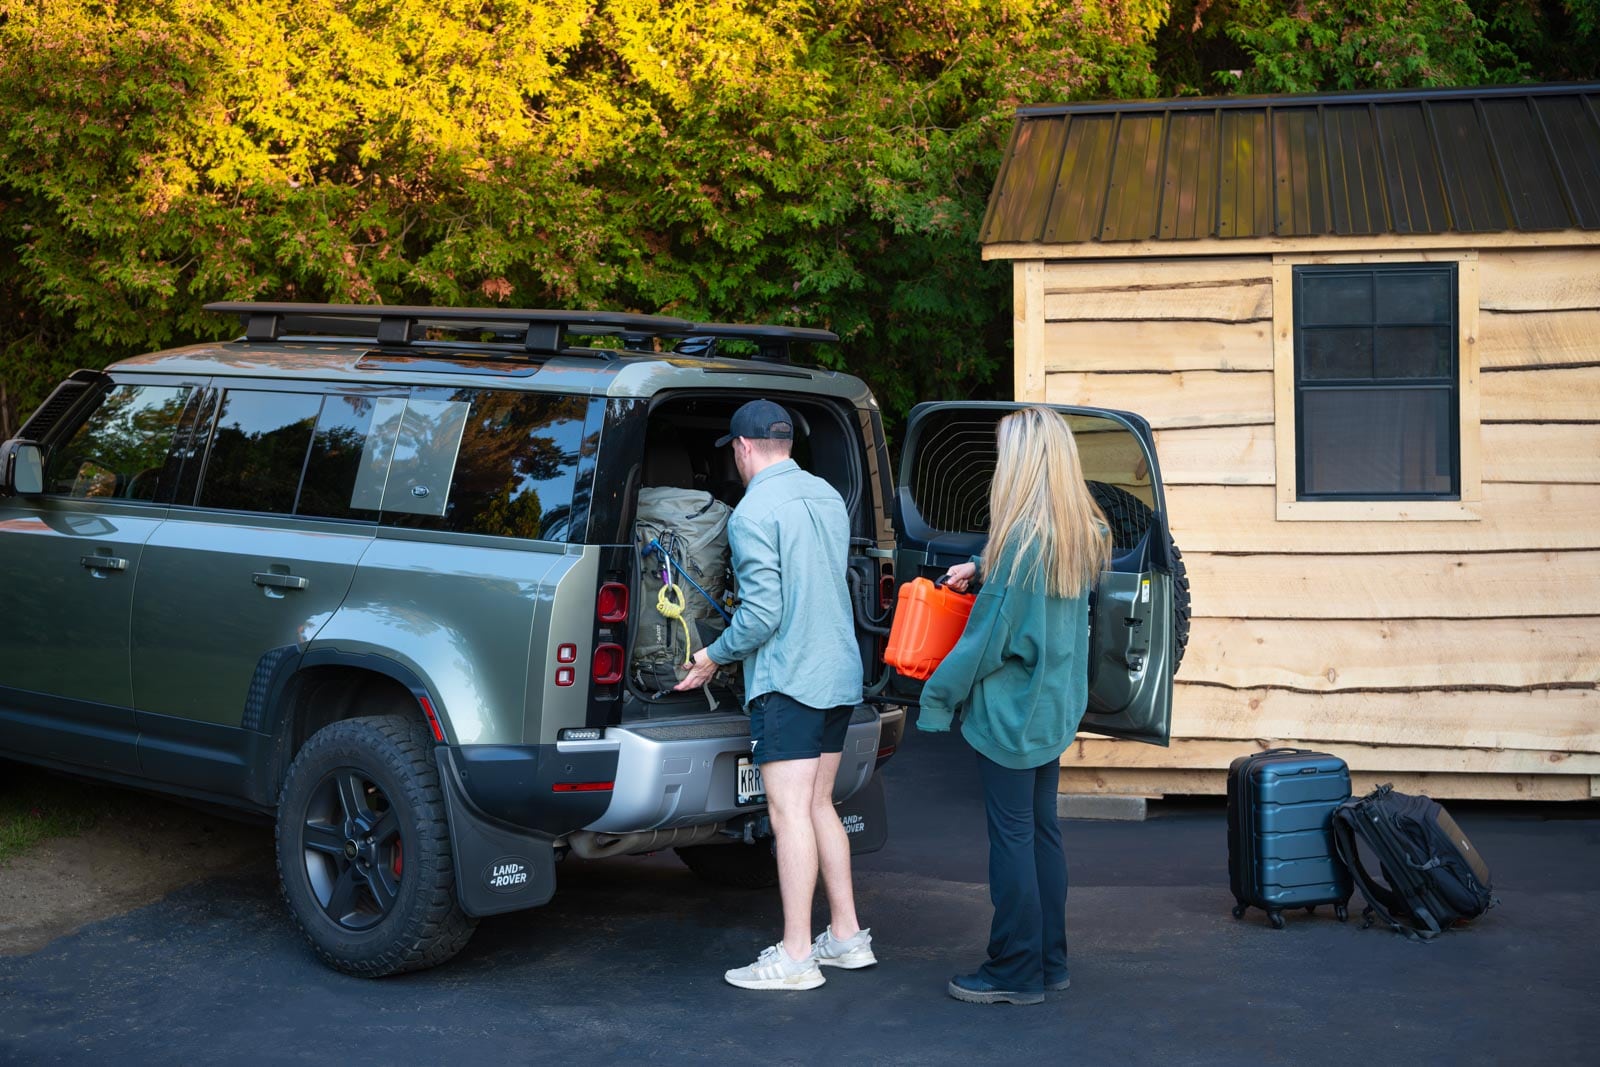 A man and woman are opening the trunk of a land rover.